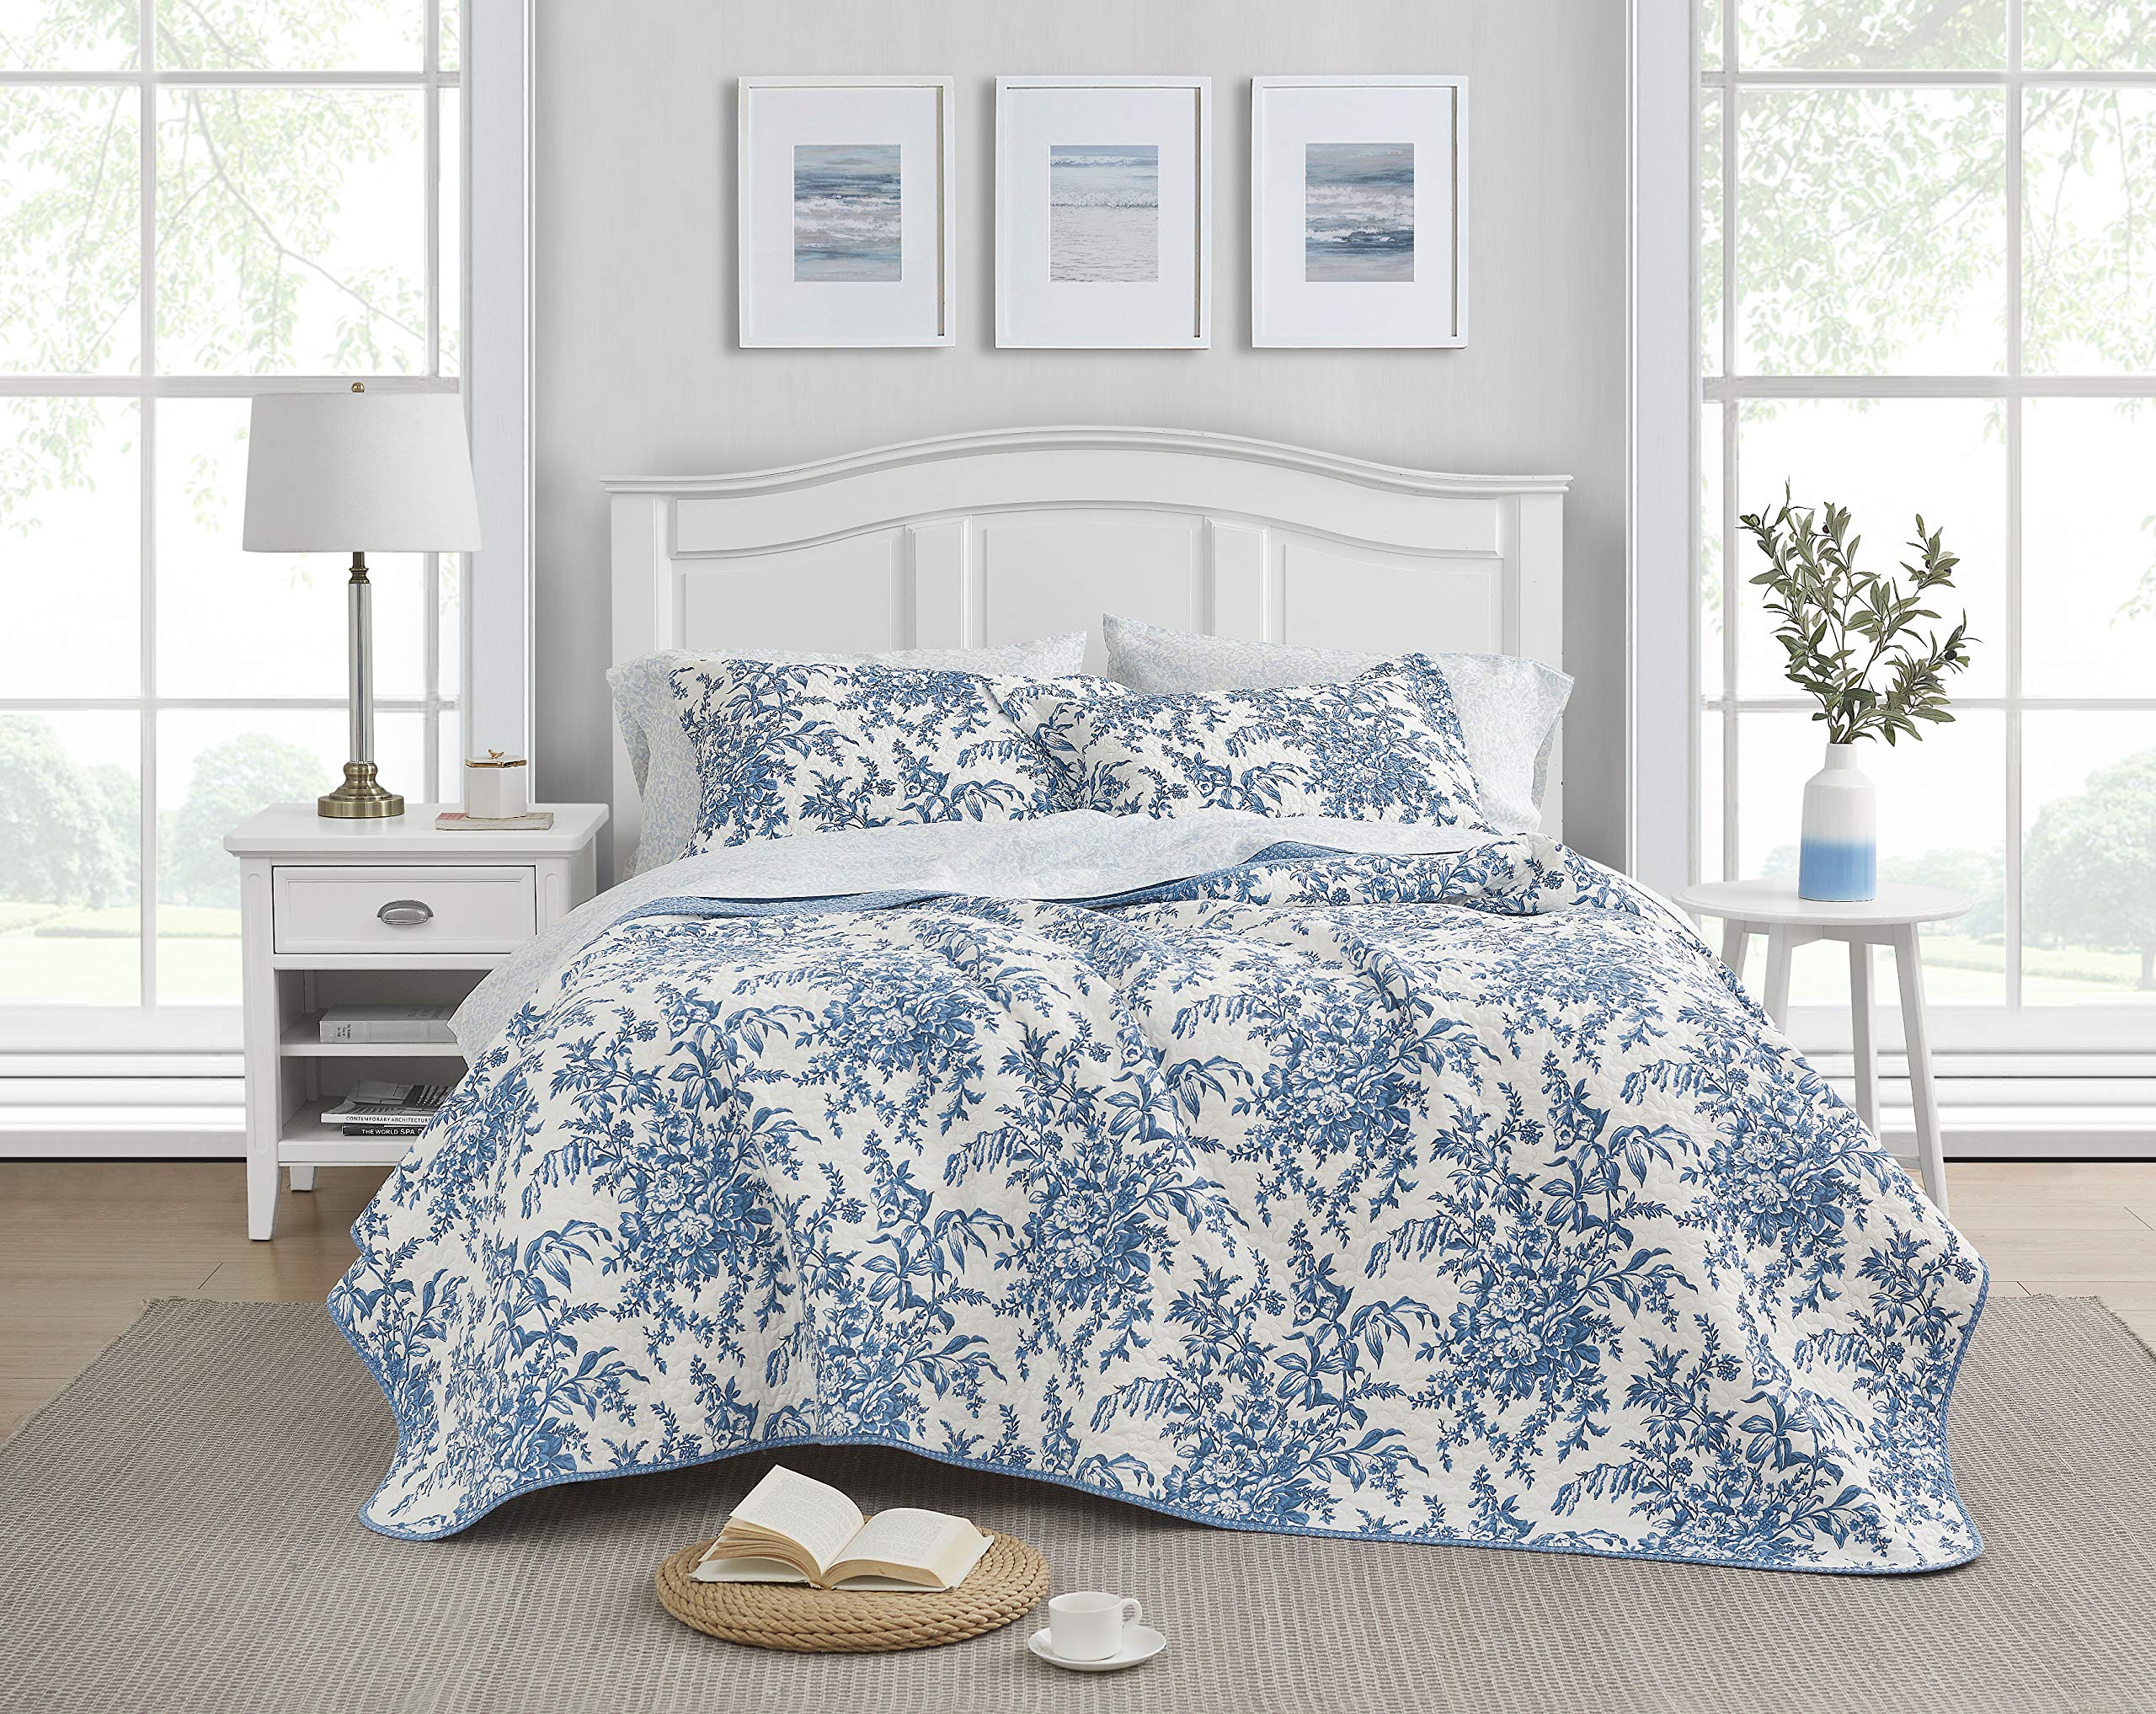 Book Cover Laura Ashley Quilt Set Reversible Cotton Bedding with Matching Sham, Lightweight Home Decor for All Seasons, Twin, Bedford Delft Blue, 3 Count Bedford Delft Blue Twin